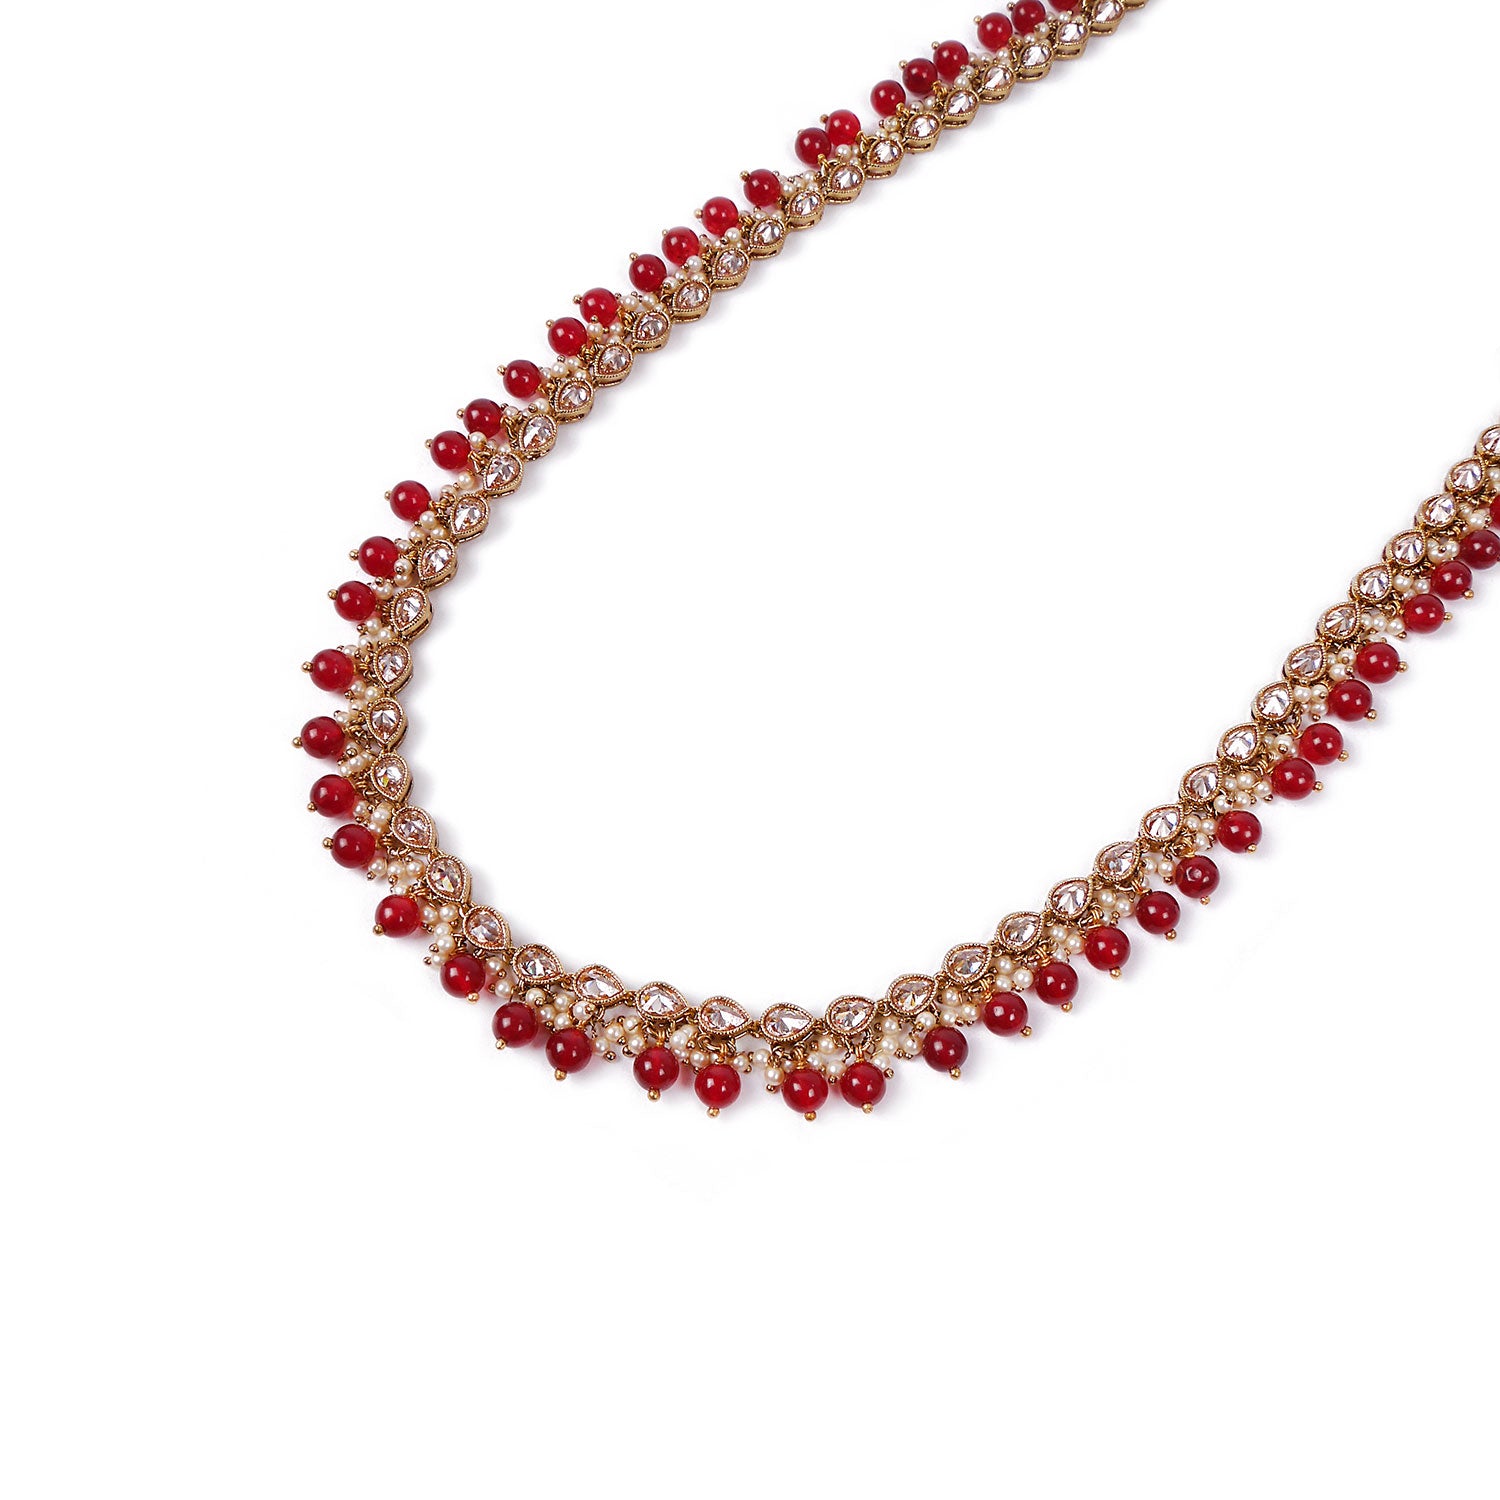 Antique Gold and Maroon Long Chain